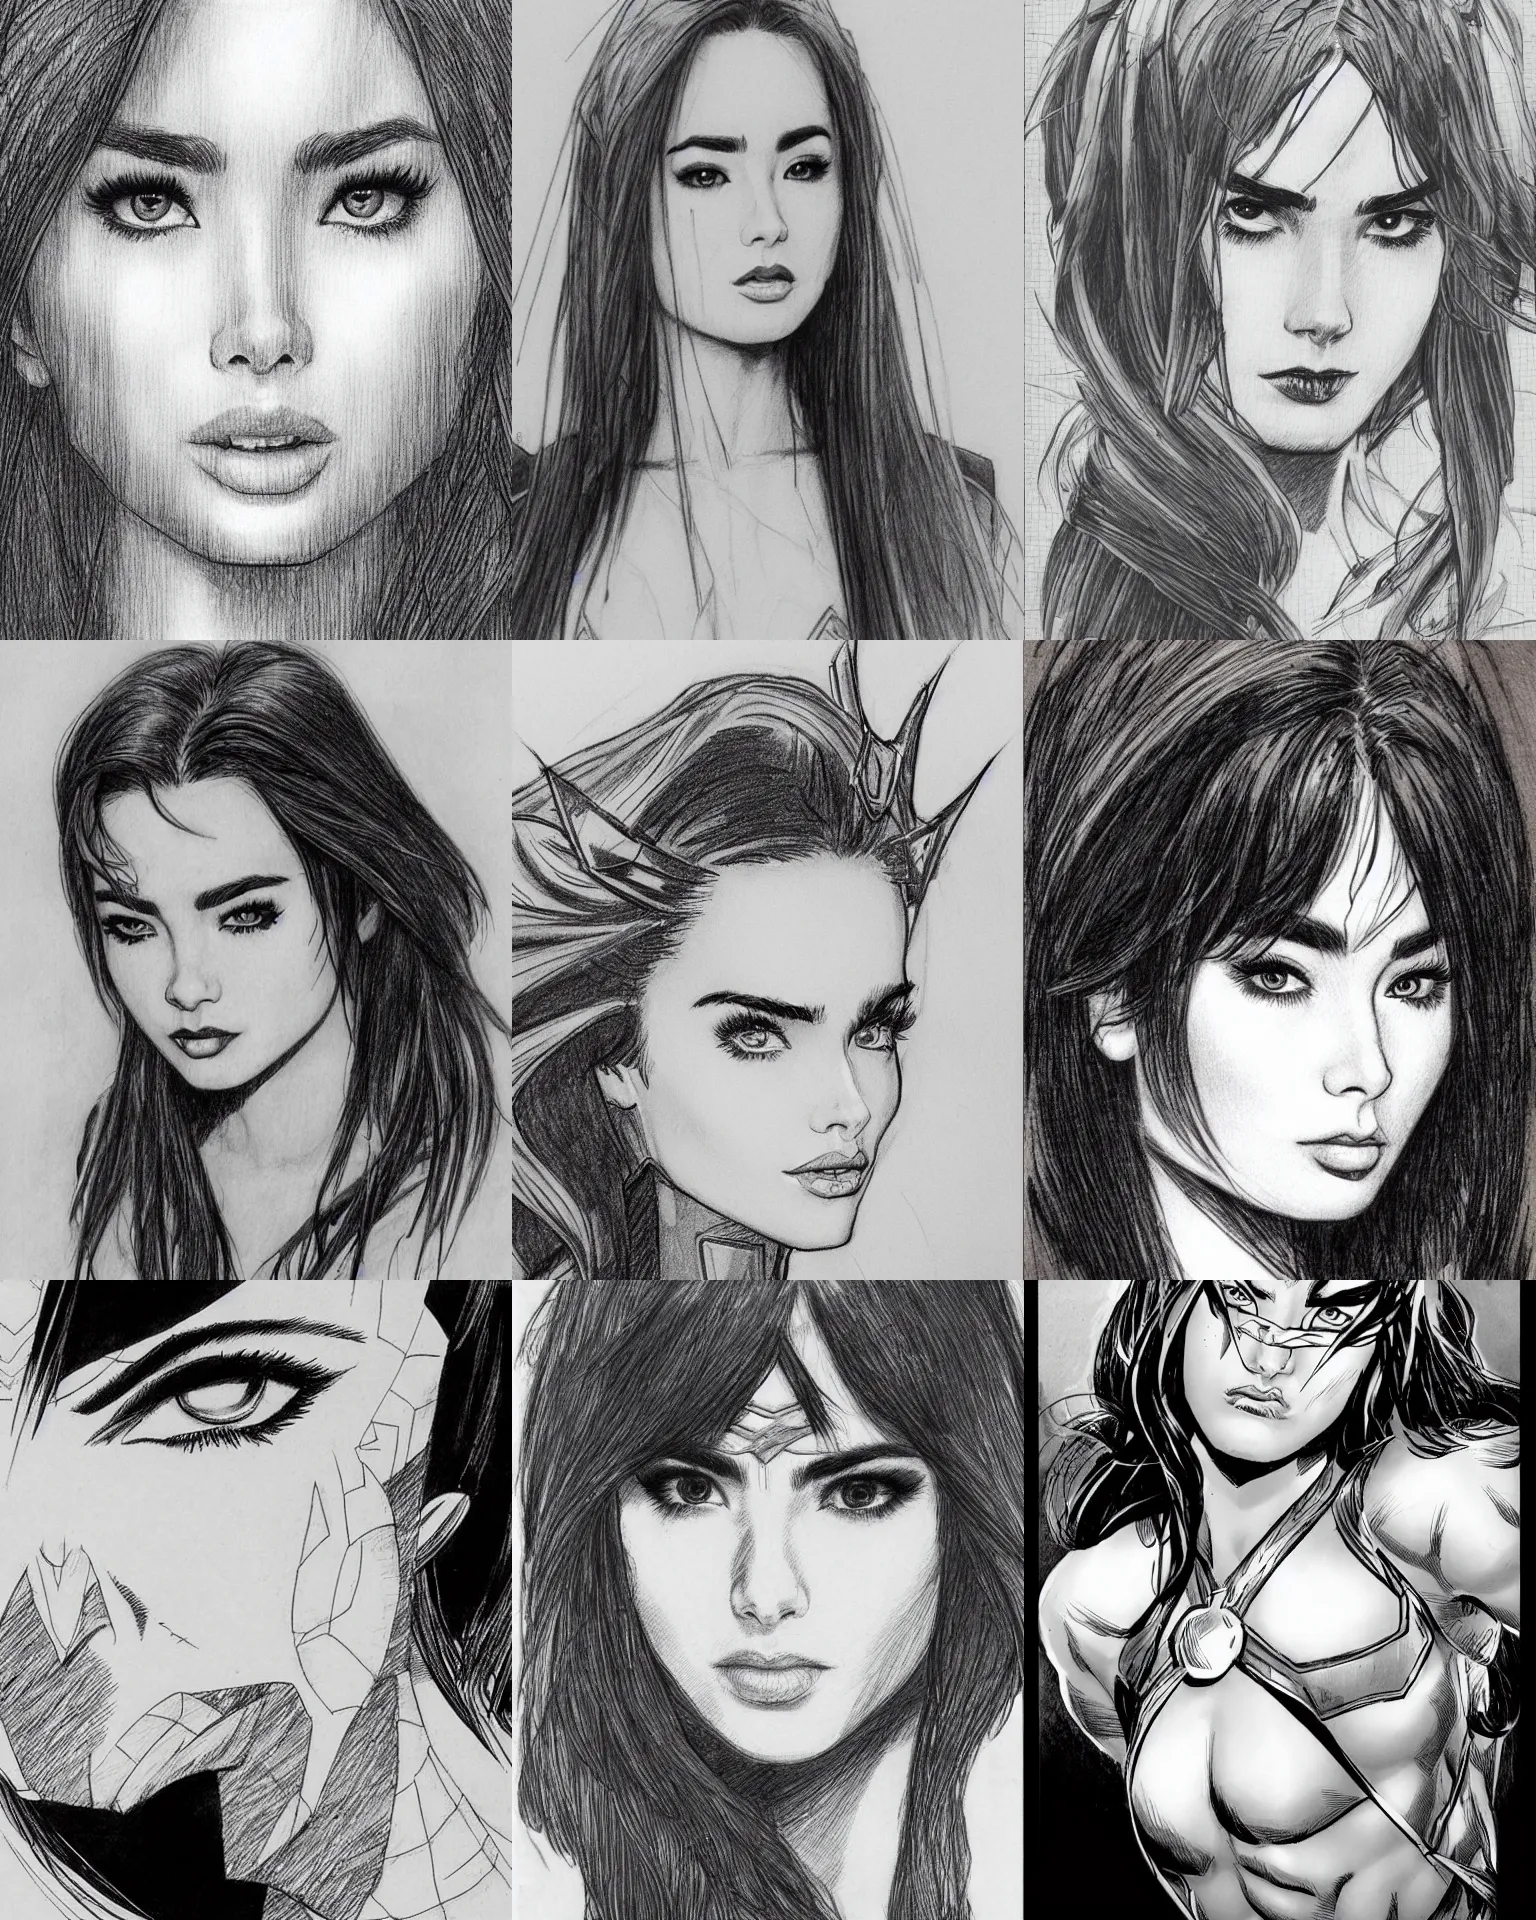 Prompt: jim lee!!! pencil sketch by jim lee close up headshot of lily collins as superhero in the style of jim lee, x-men superhero comic book character by jim lee